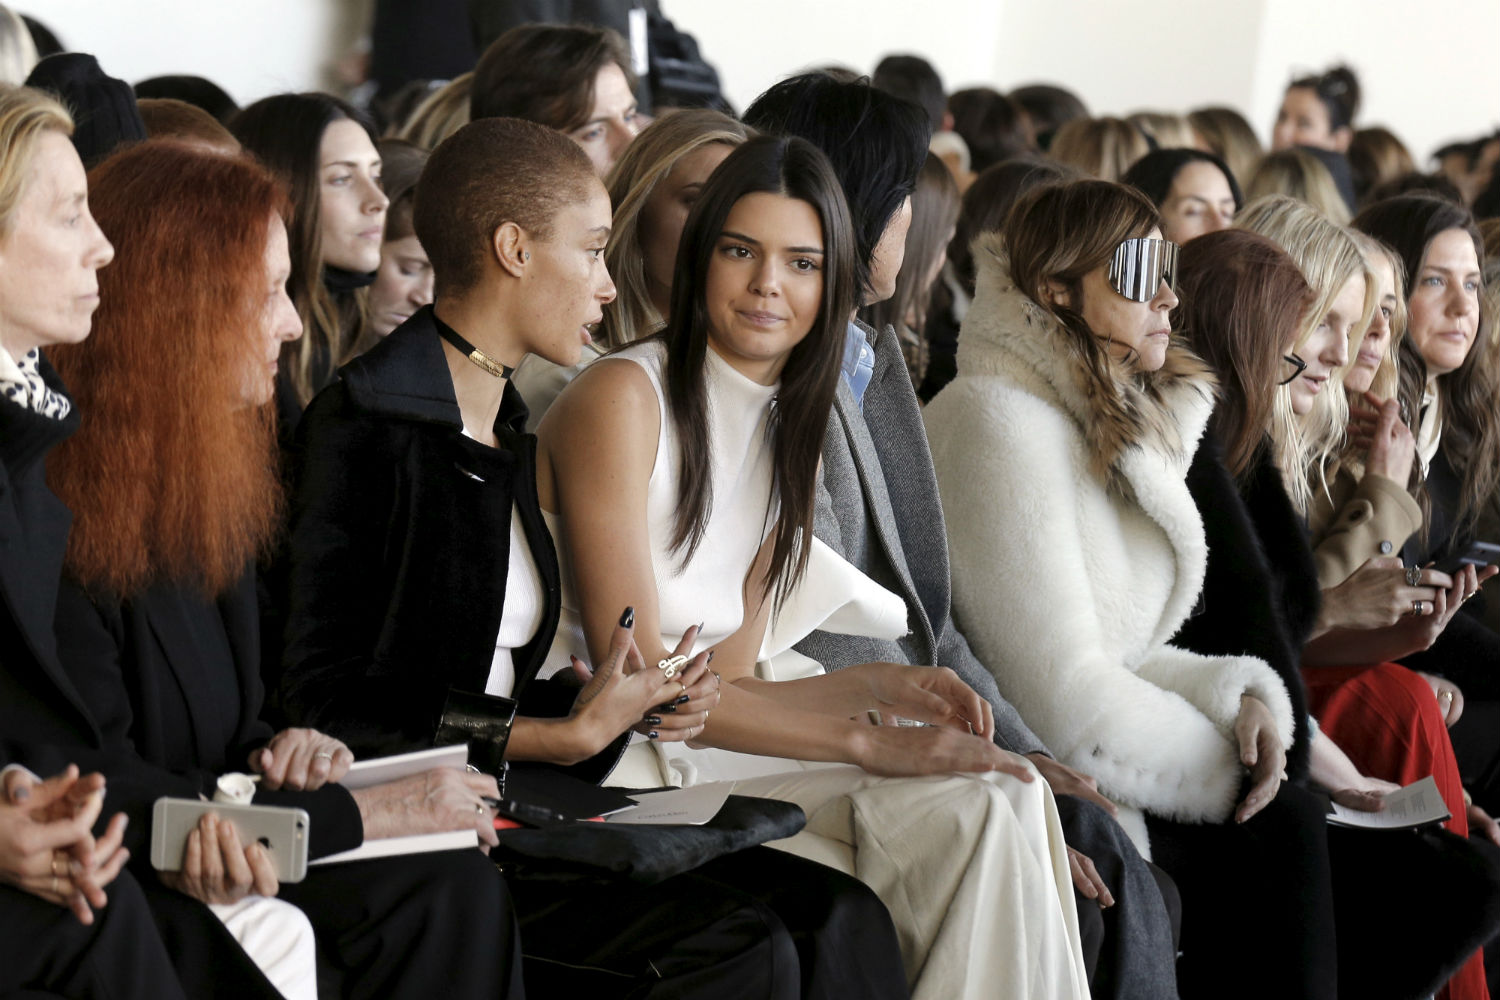 Models Adwoa Aboah (3rd-L) and Kendall Jenner (C) attend the Calvin Klein Fall/Winter 2016 collection during New York Fashion Week in New York, February 18, 2016. REUTERS/Brendan McDermid